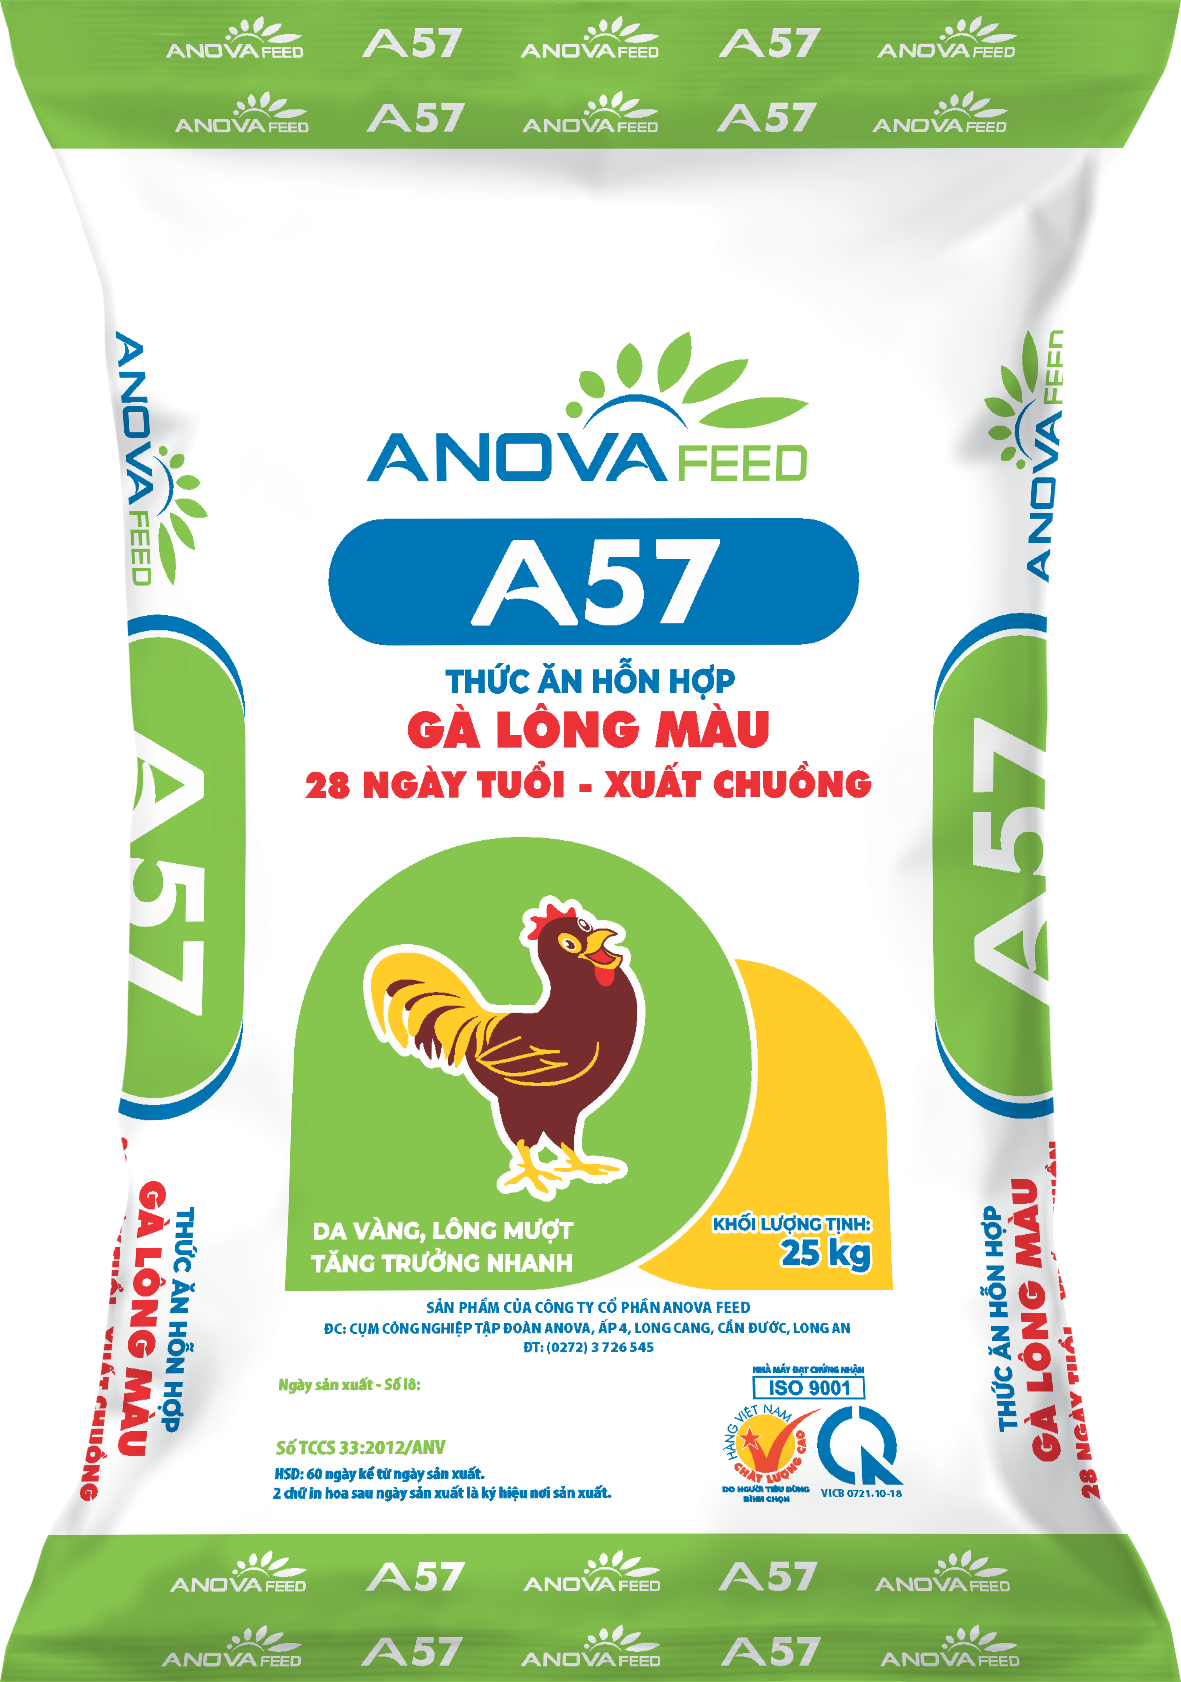 Color poultry feed (28 days - market)